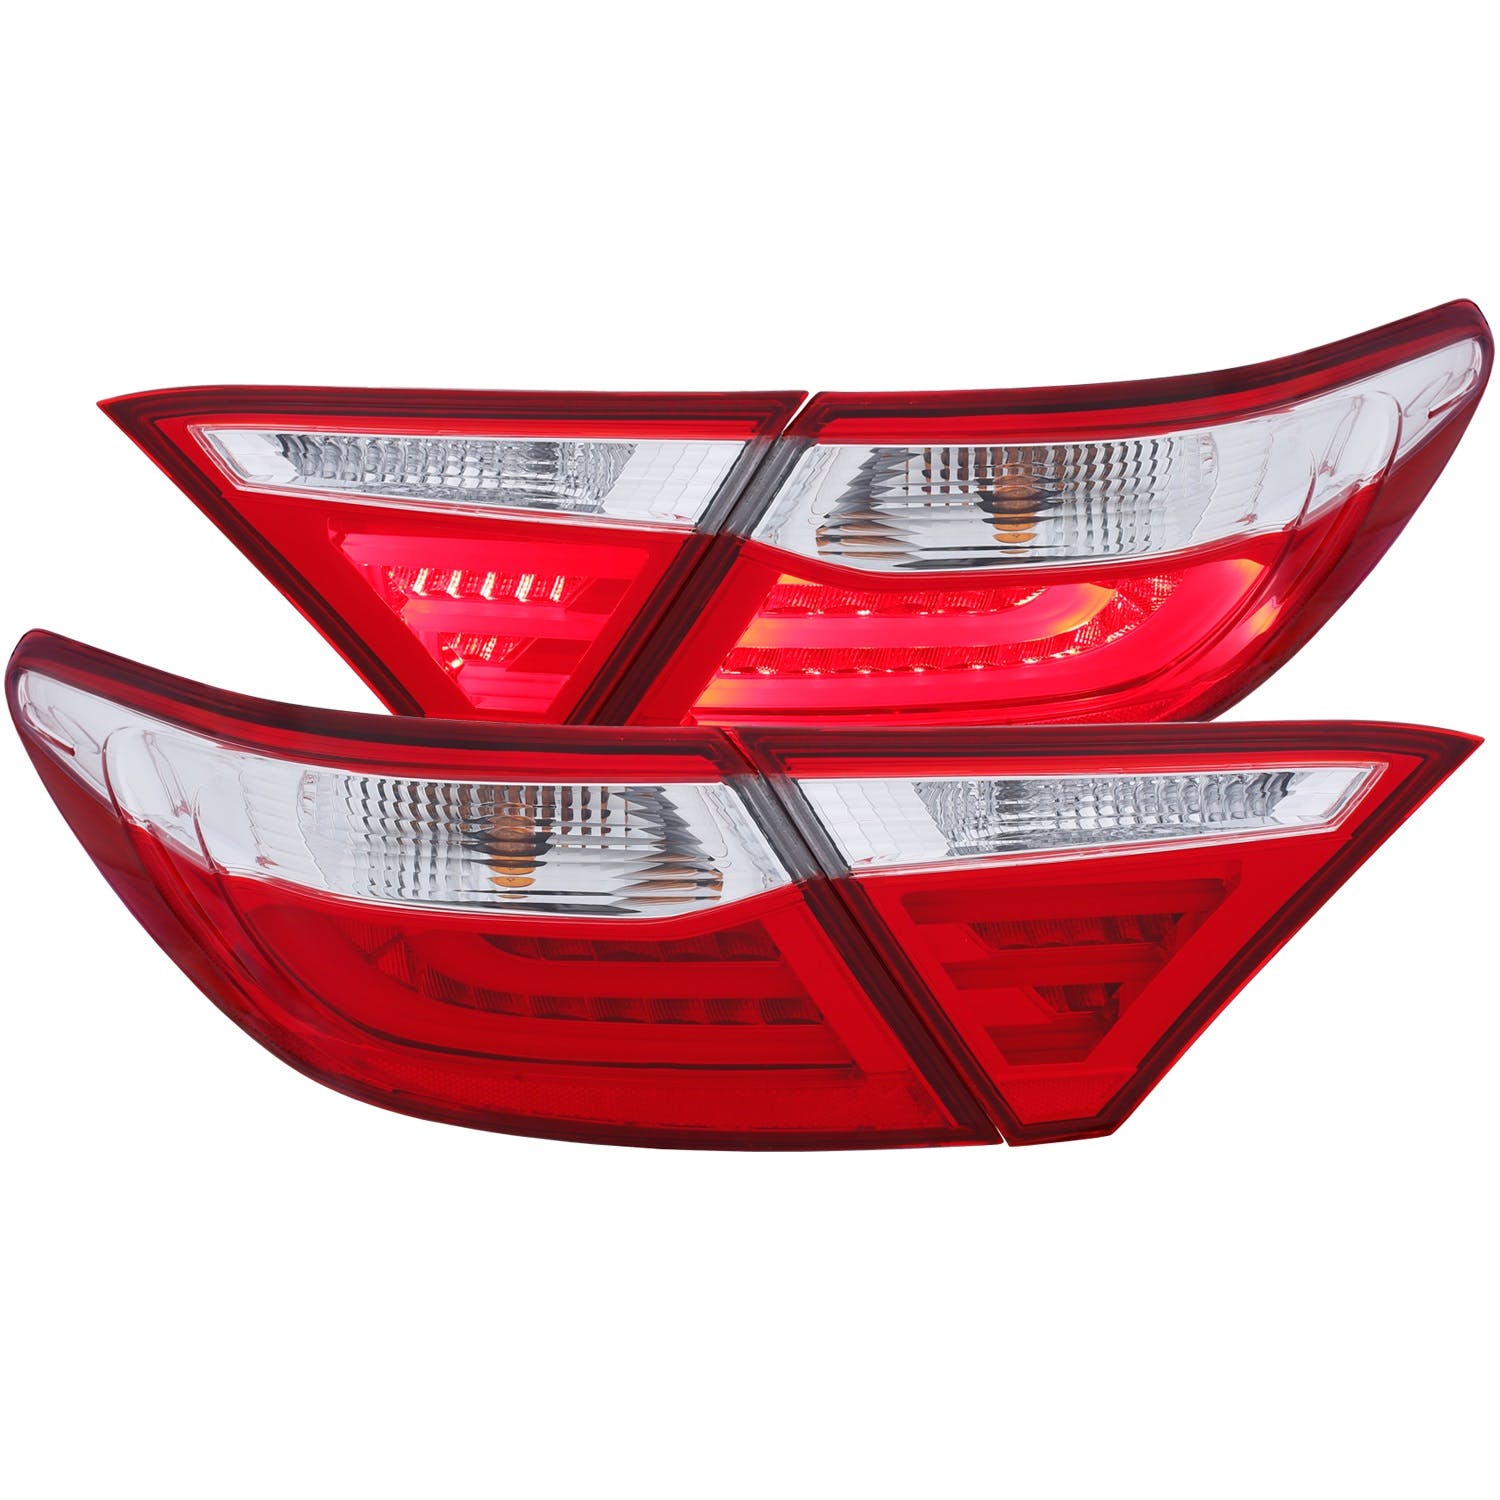 AnzoUSA 321335 LED Taillights Red/Clear